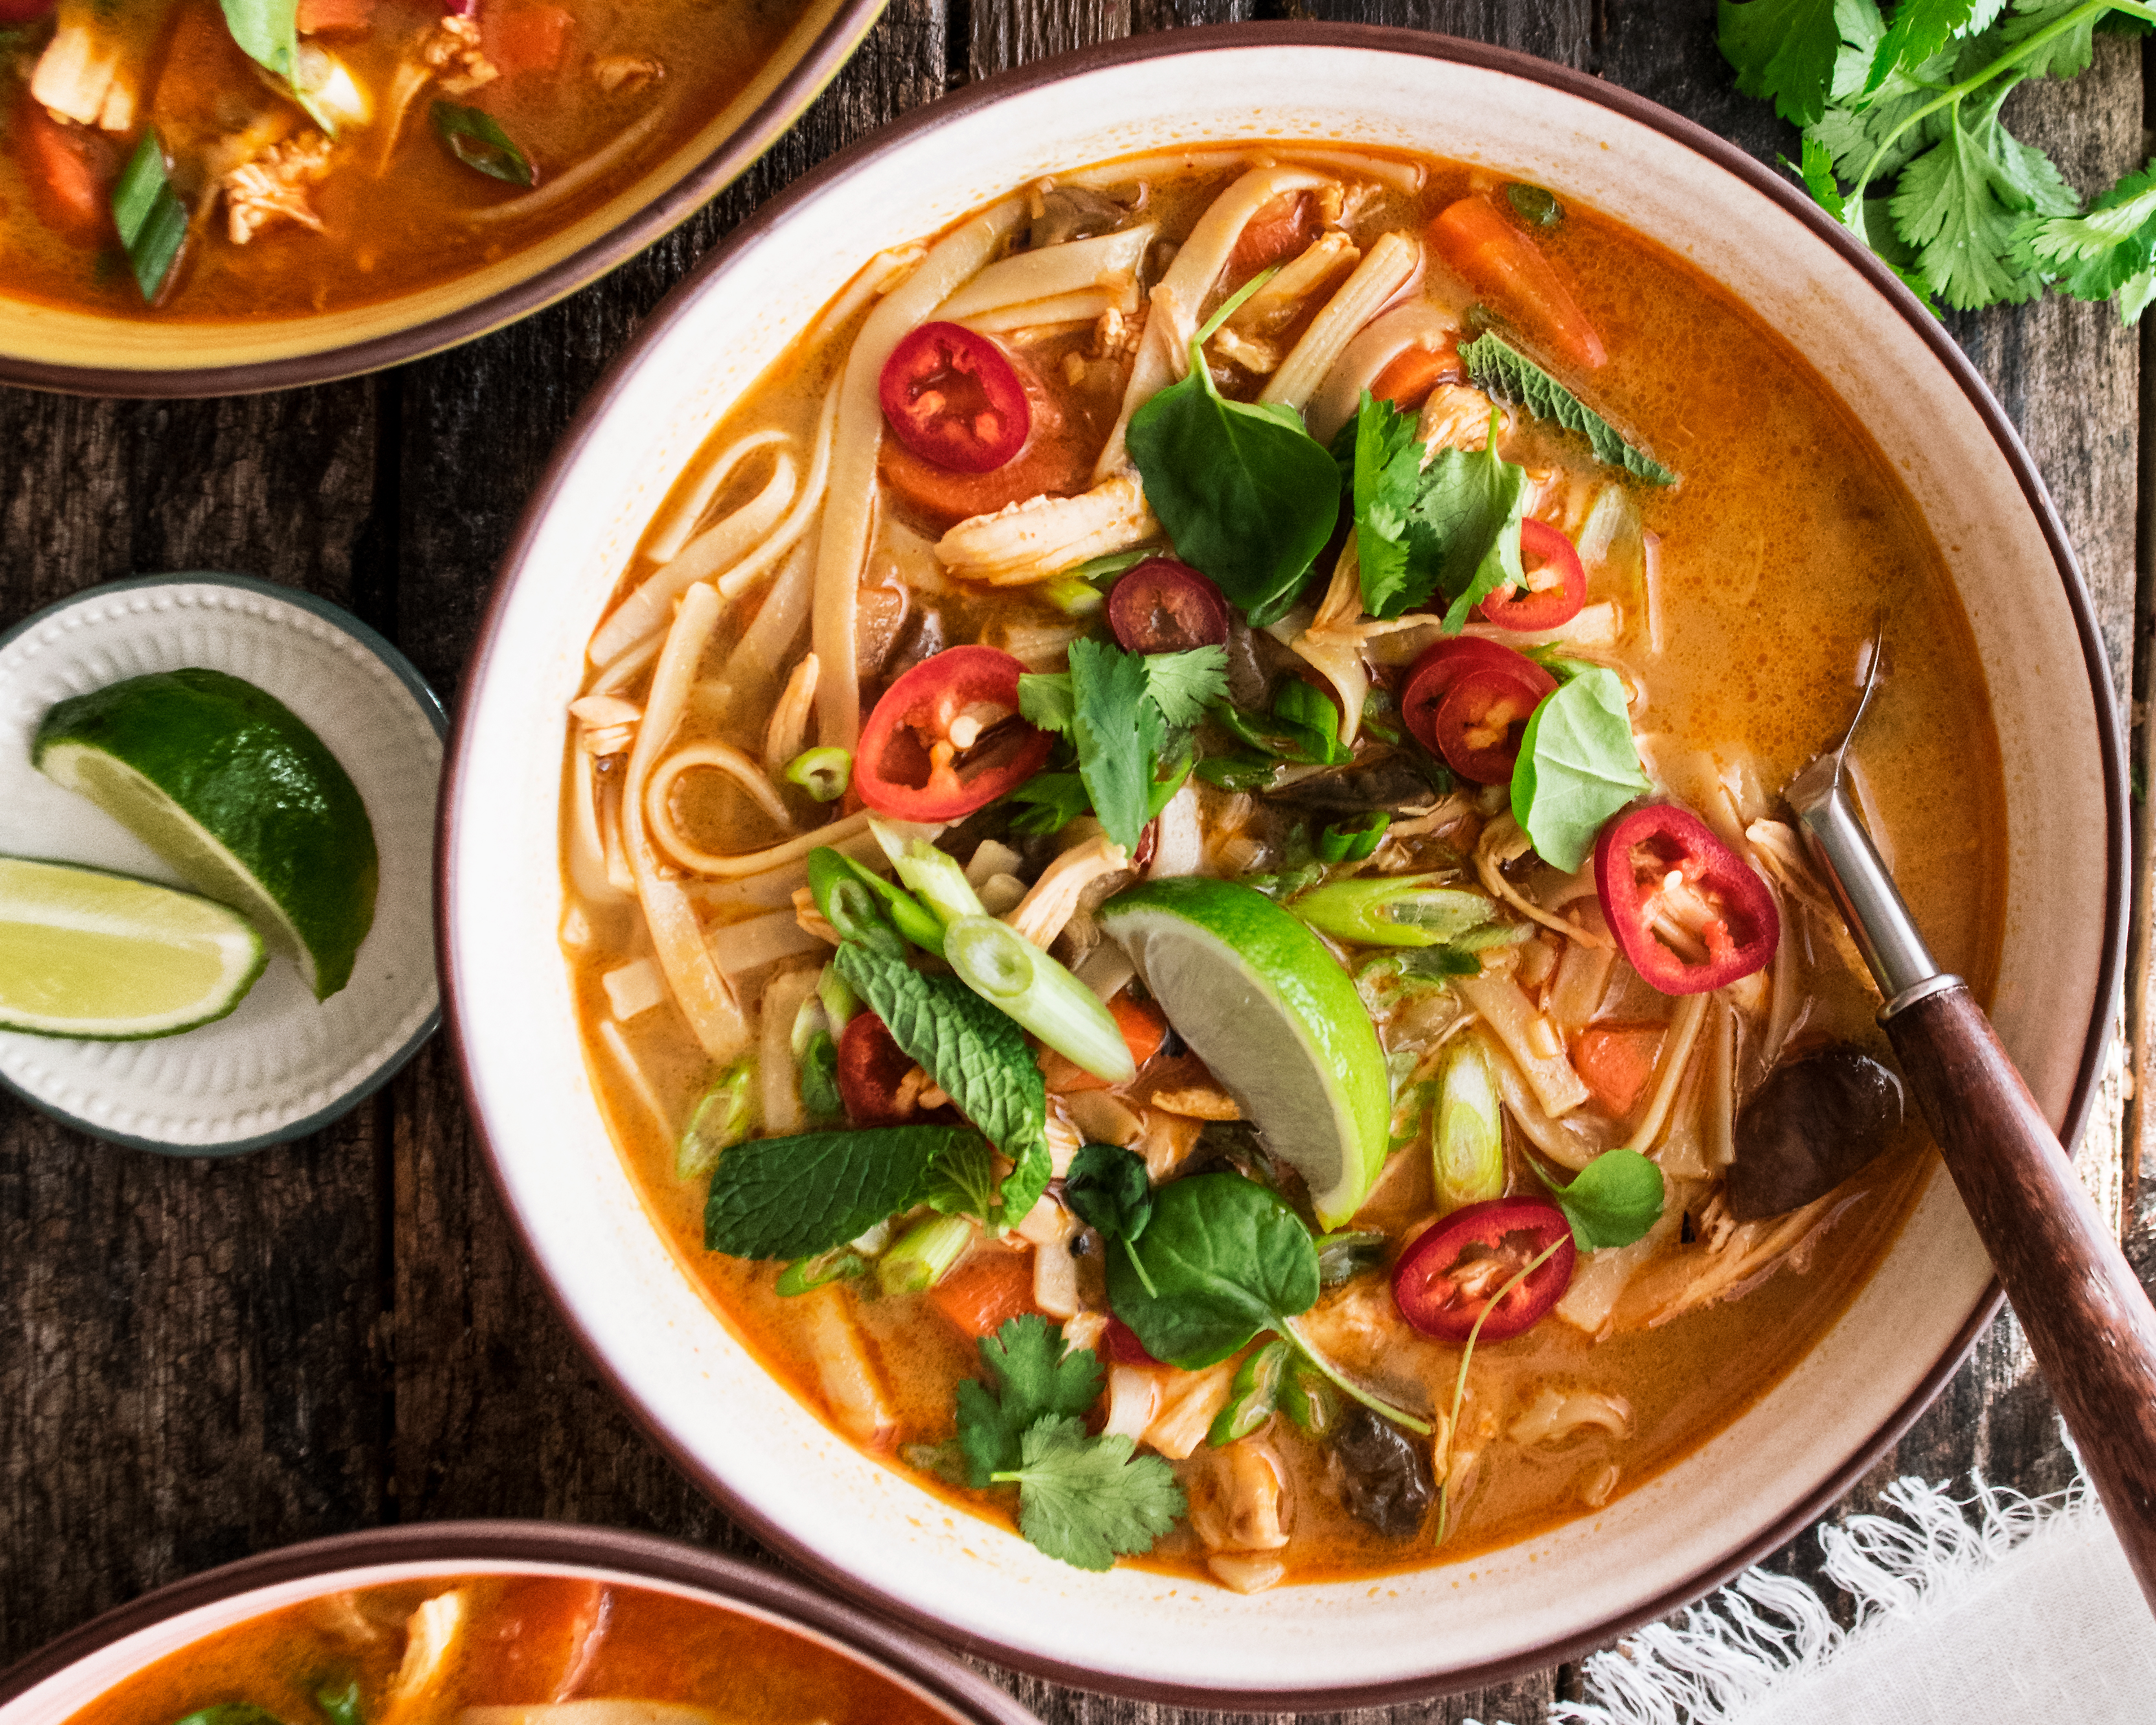 Spicy Thai Chicken & Rice Noodle Soup - The Original Dish